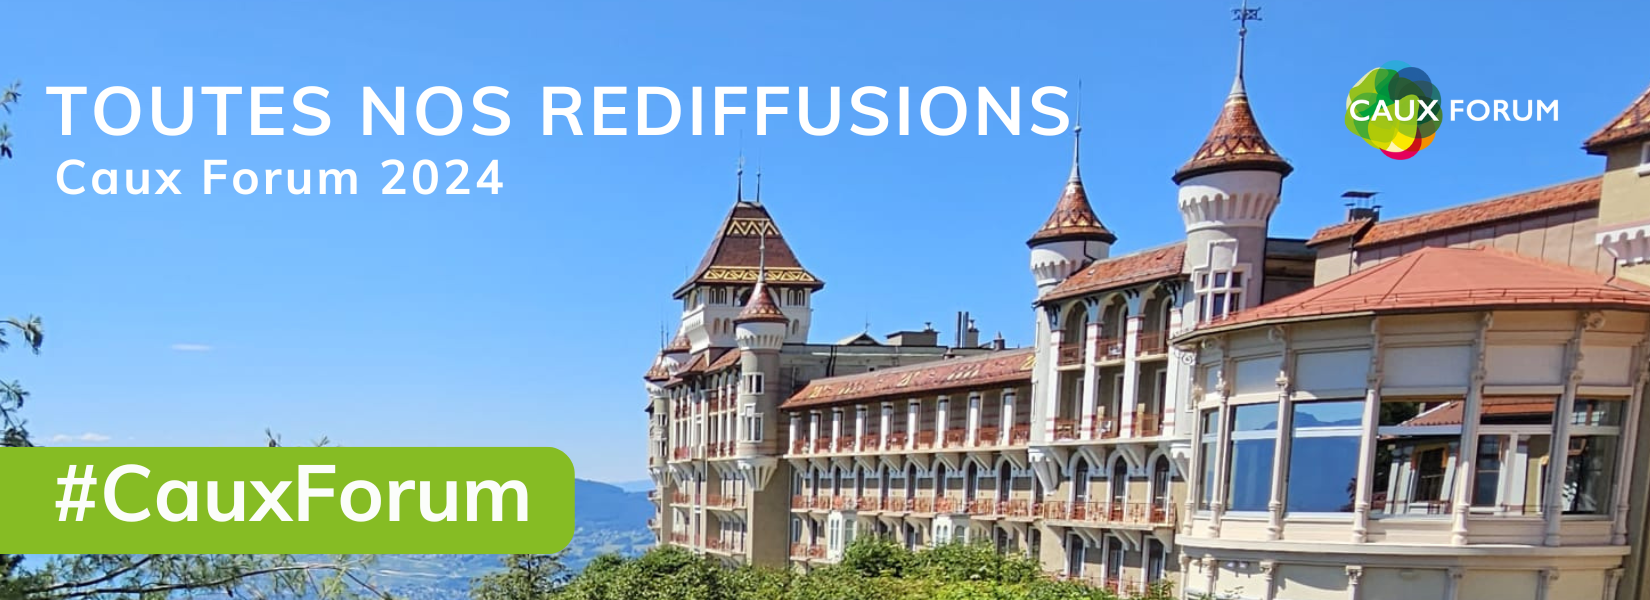 Caux Forum 2024: Watch the replays FR